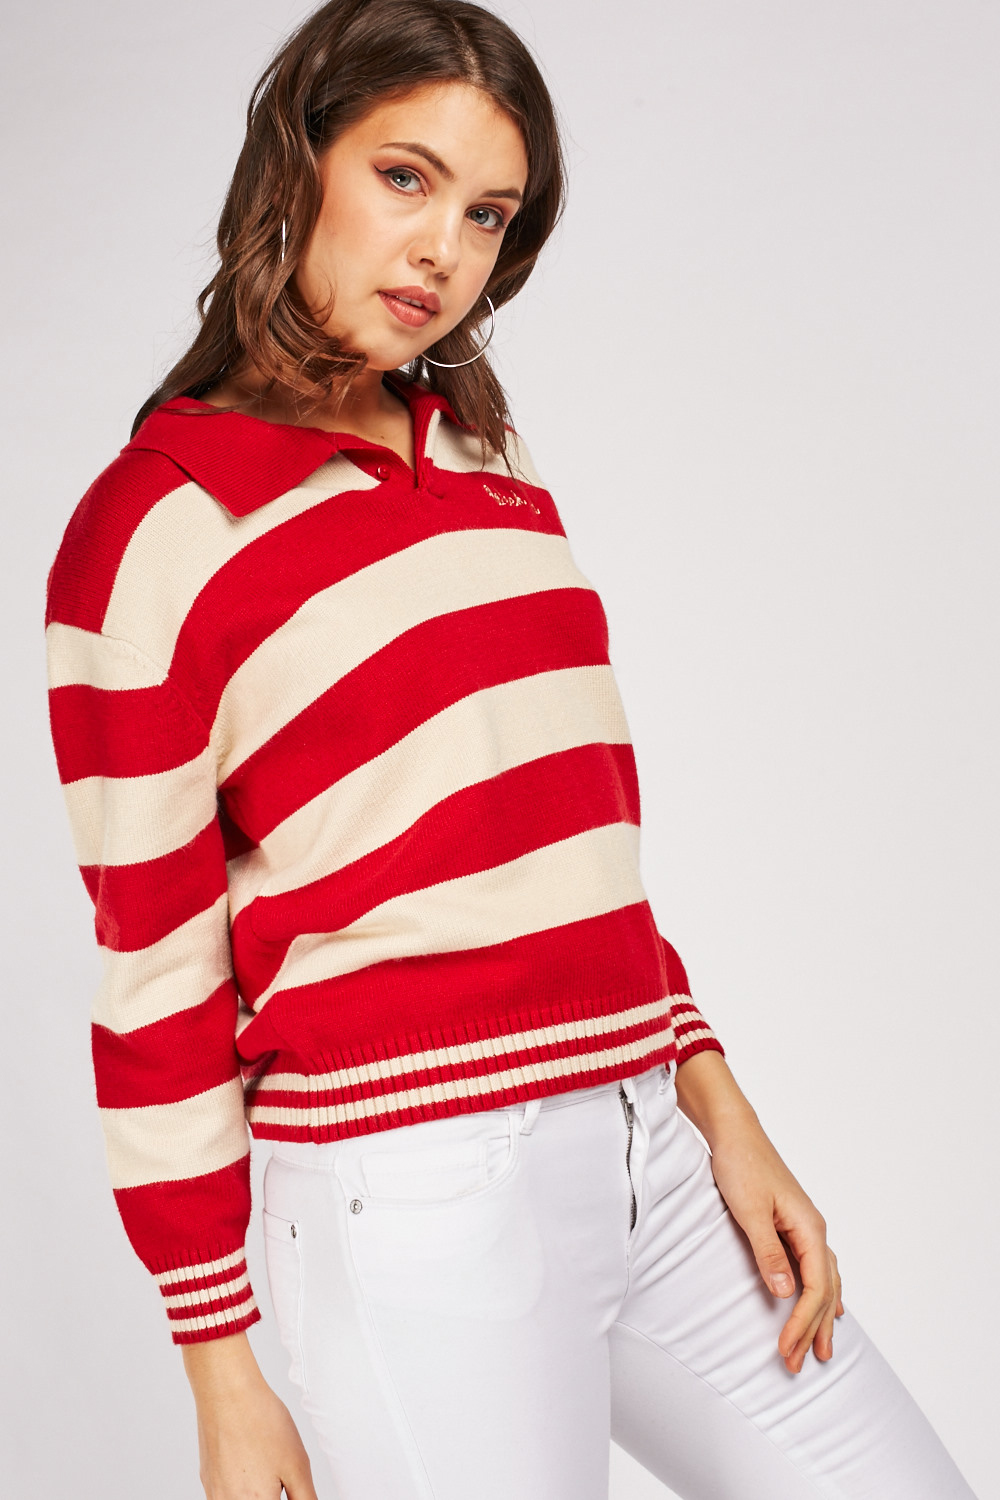 Chunky Striped Collared Jumper - Red/Cream - Just $6